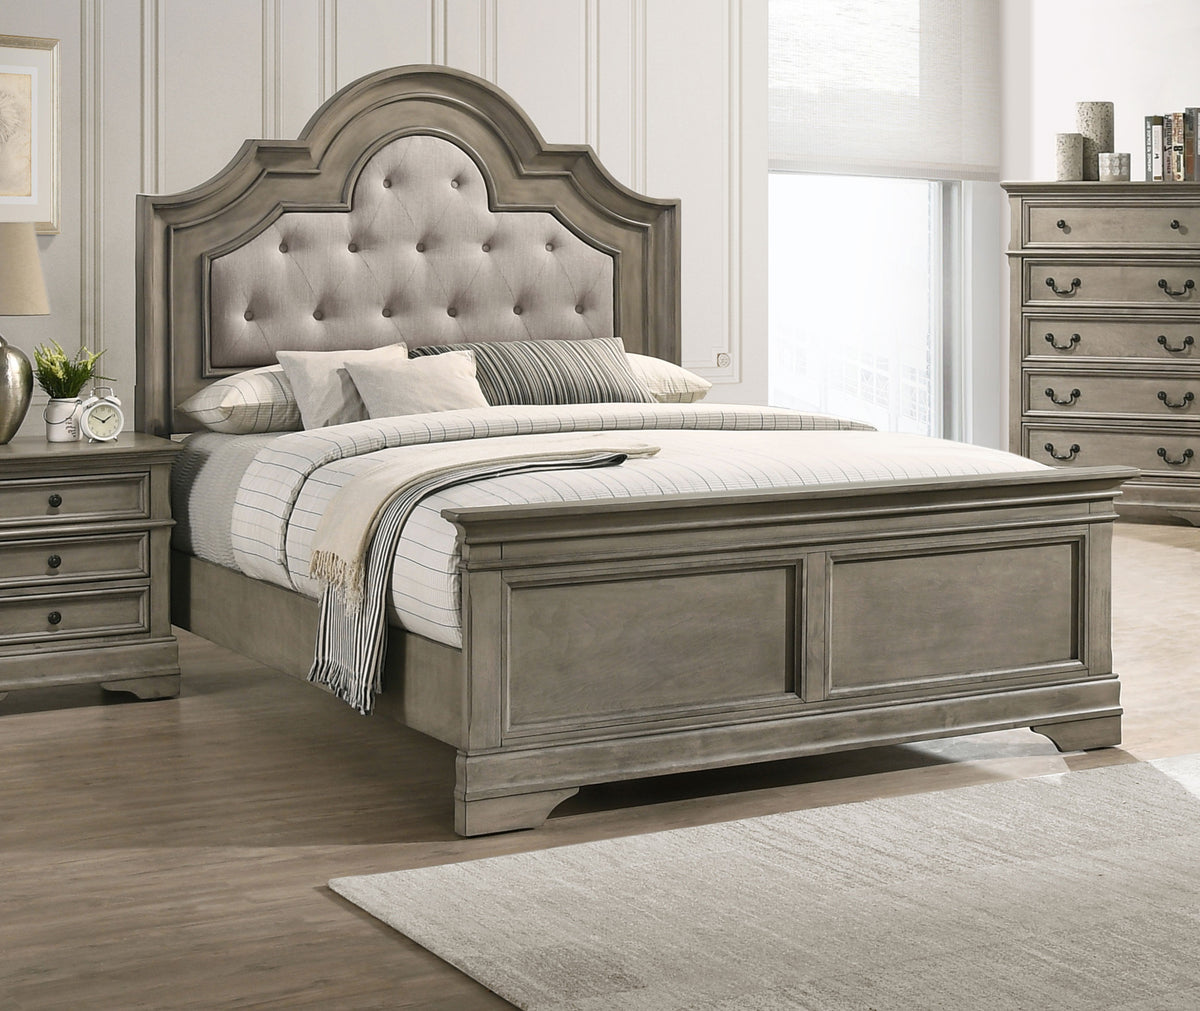 Manchester Bed with Upholstered Arched Headboard Beige and Wheat  Las Vegas Furniture Stores